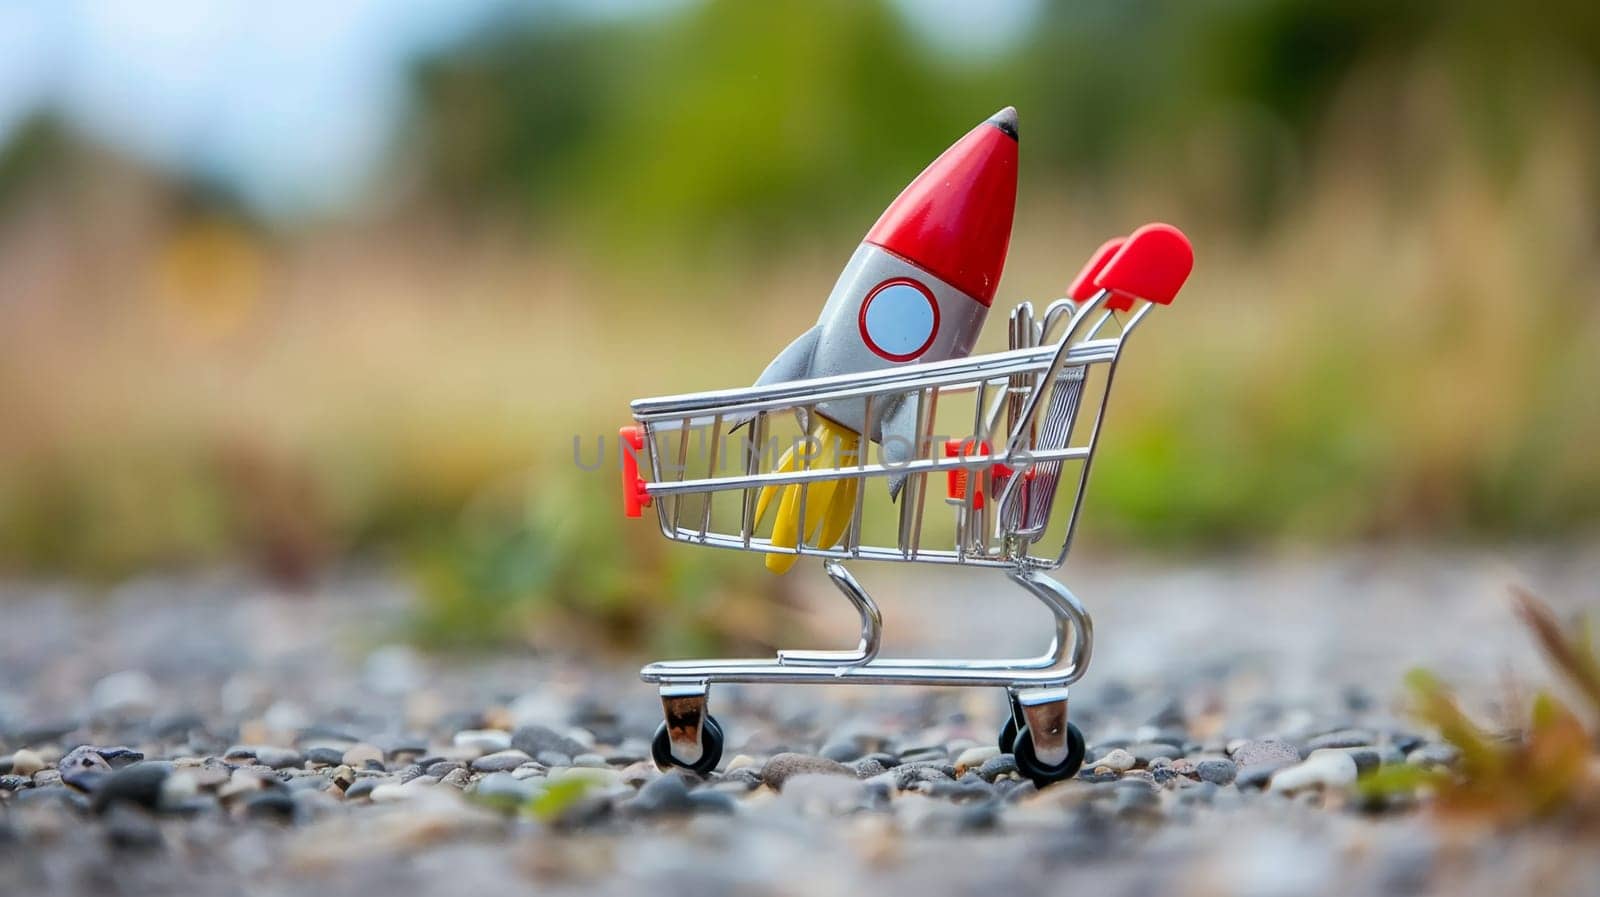 Creative concept of speed in consumerism depicted by miniature rocket in shopping cart on a pebble path.